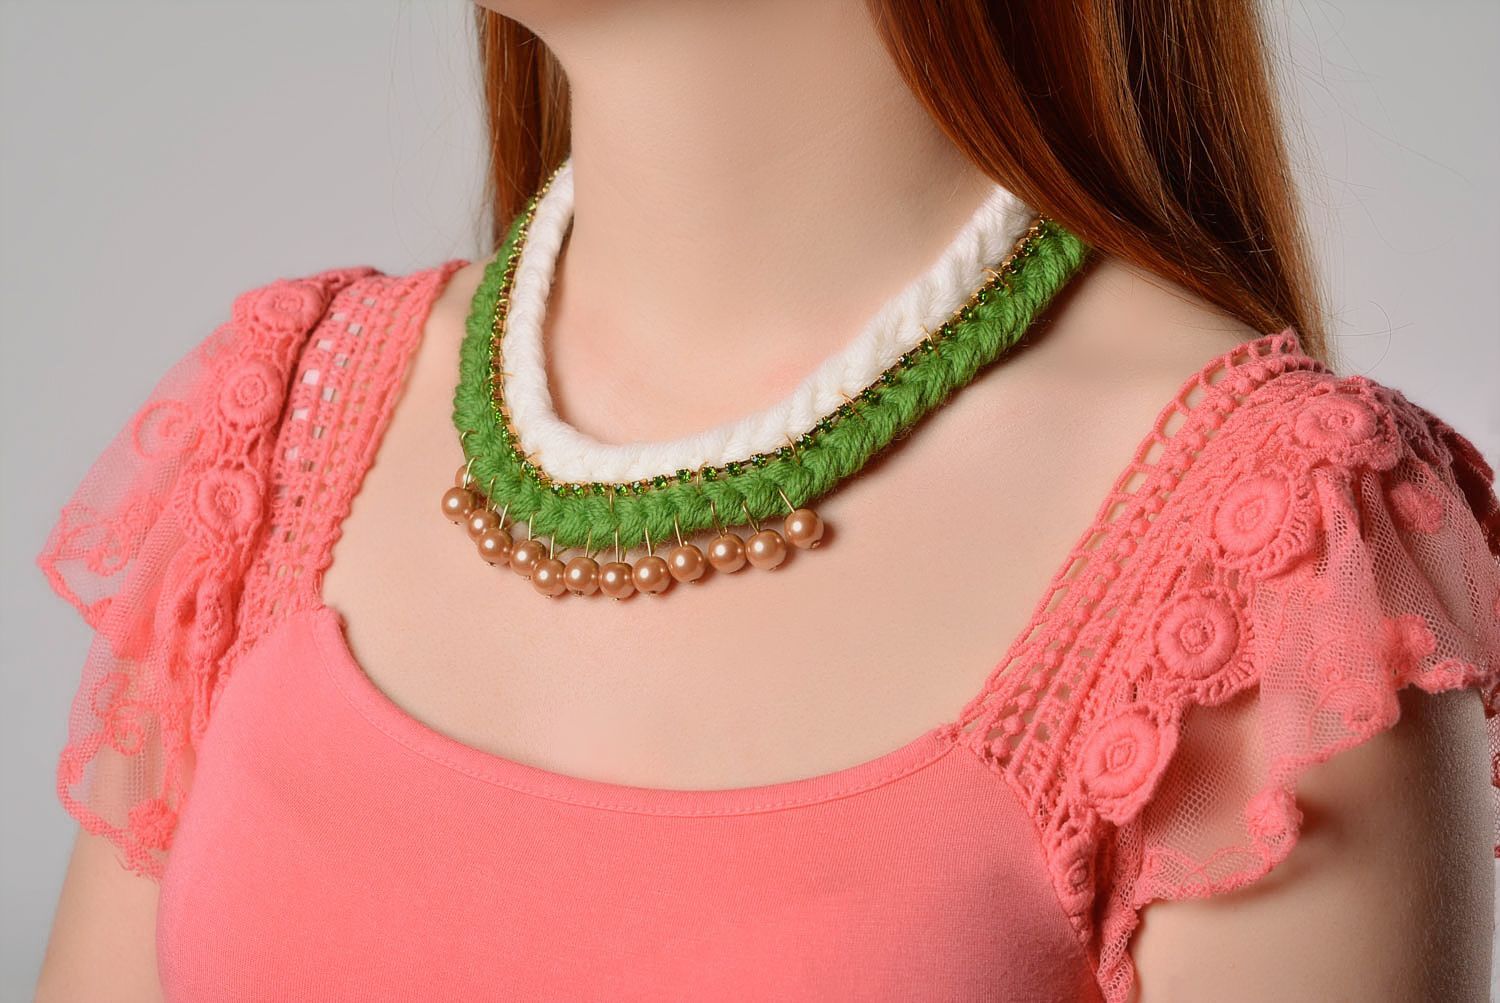 Chain necklace designer jewelry handmade necklace unique jewelry gifts for girl photo 2